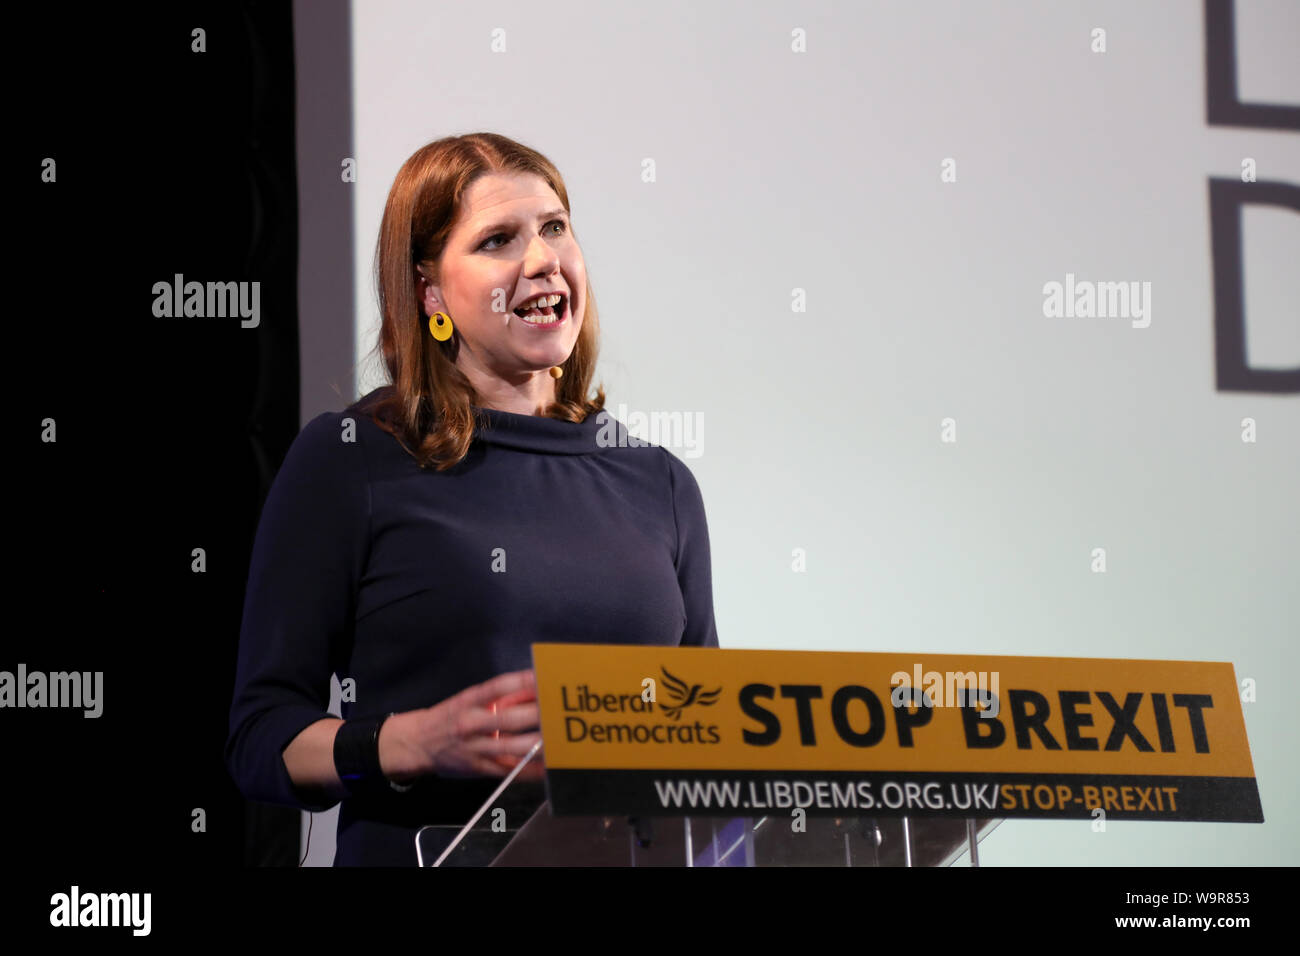 London / UK – August 15, 2019: Liberal Democrats leader Jo Swinson delivers a speech on Brexit in central London Stock Photo